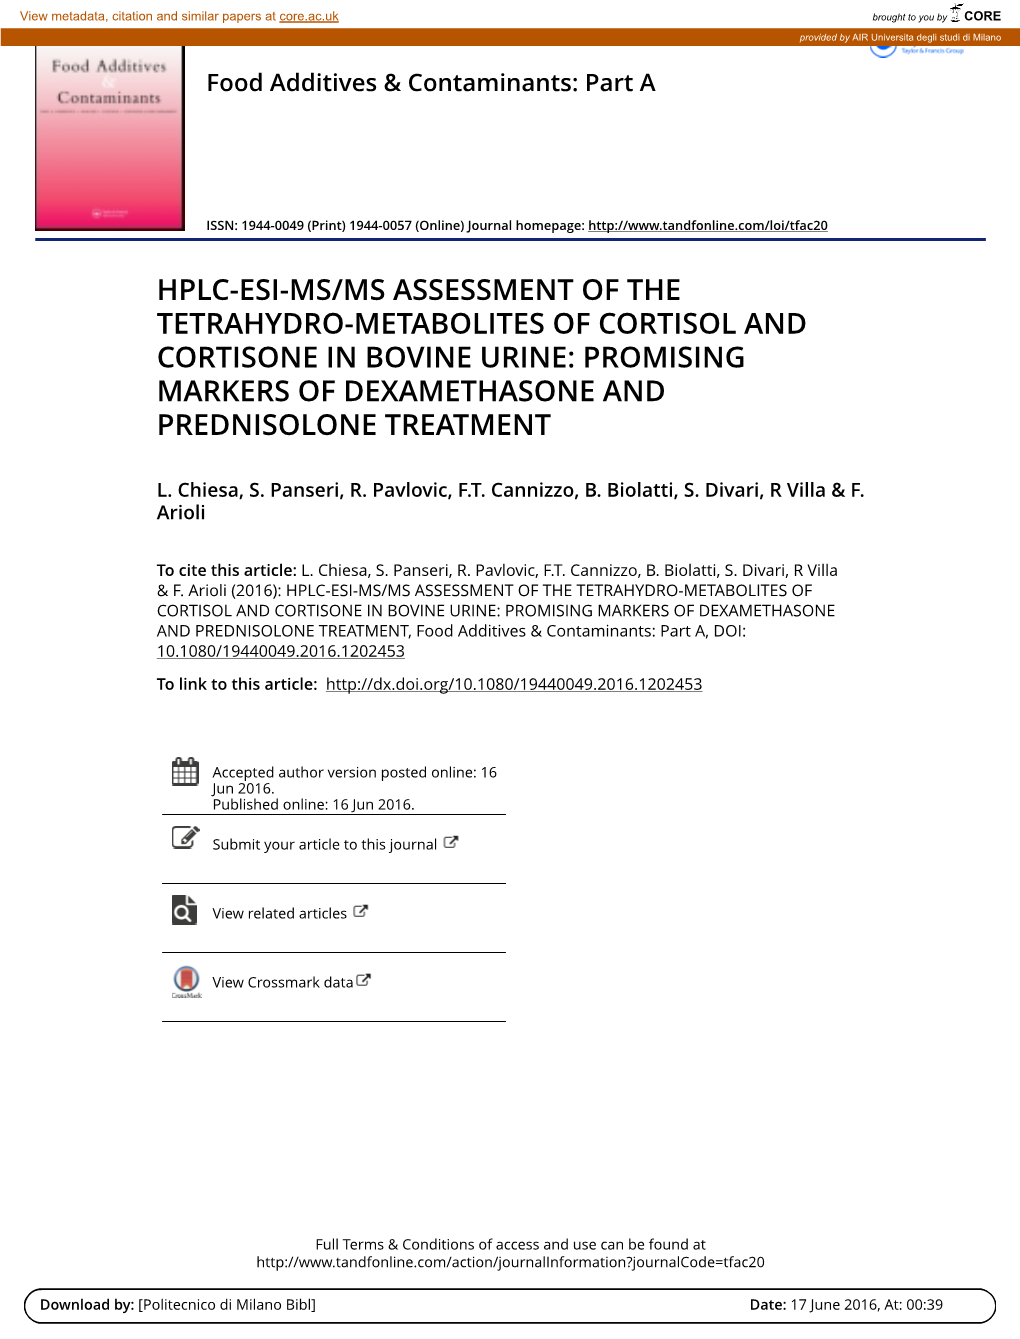 Hplc-Esi-Ms/Ms Assessment of the Tetrahydro-Metabolites of Cortisol and Cortisone in Bovine Urine: Promising Markers of Dexamethasone and Prednisolone Treatment